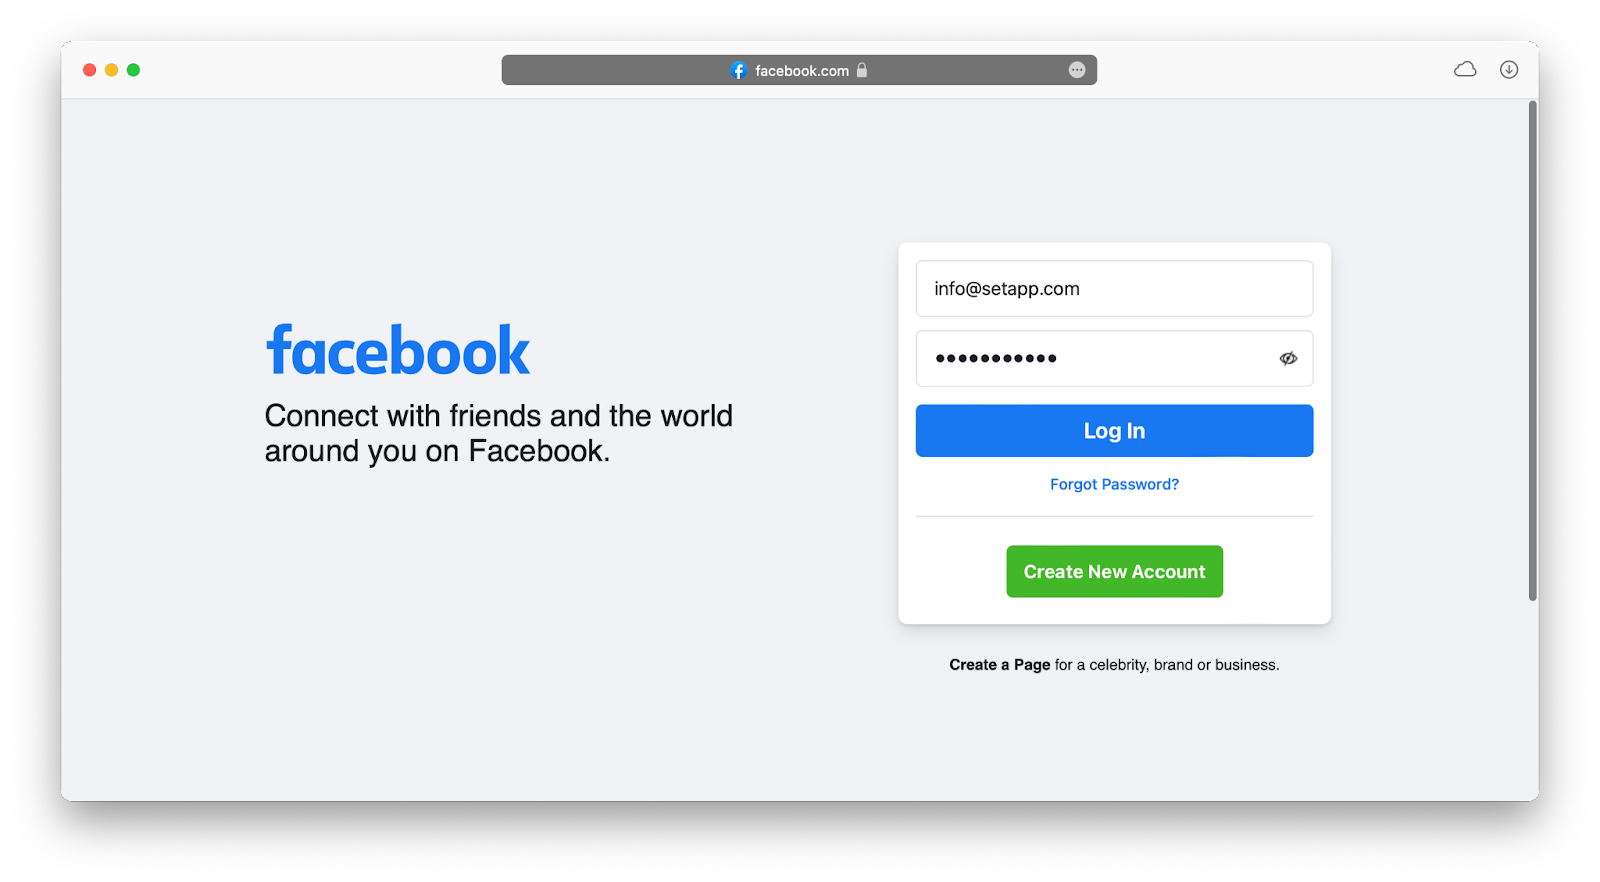 How to create new Facebook accounts on Mac